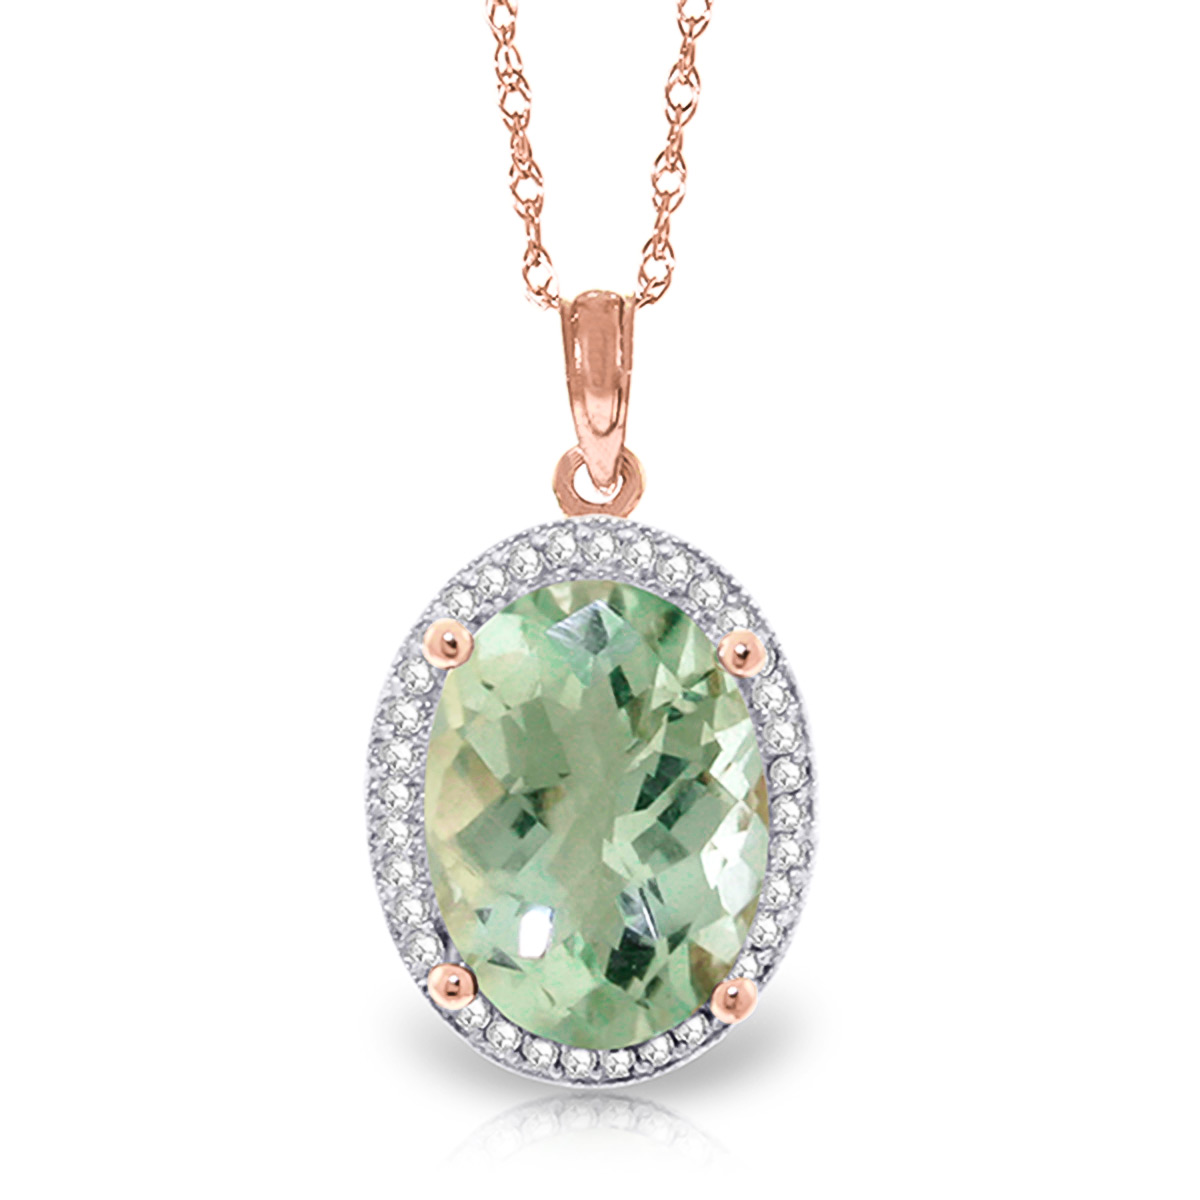 Green Amethyst Halo Pendant Necklace 5.08 ctw in 9ct Rose Gold